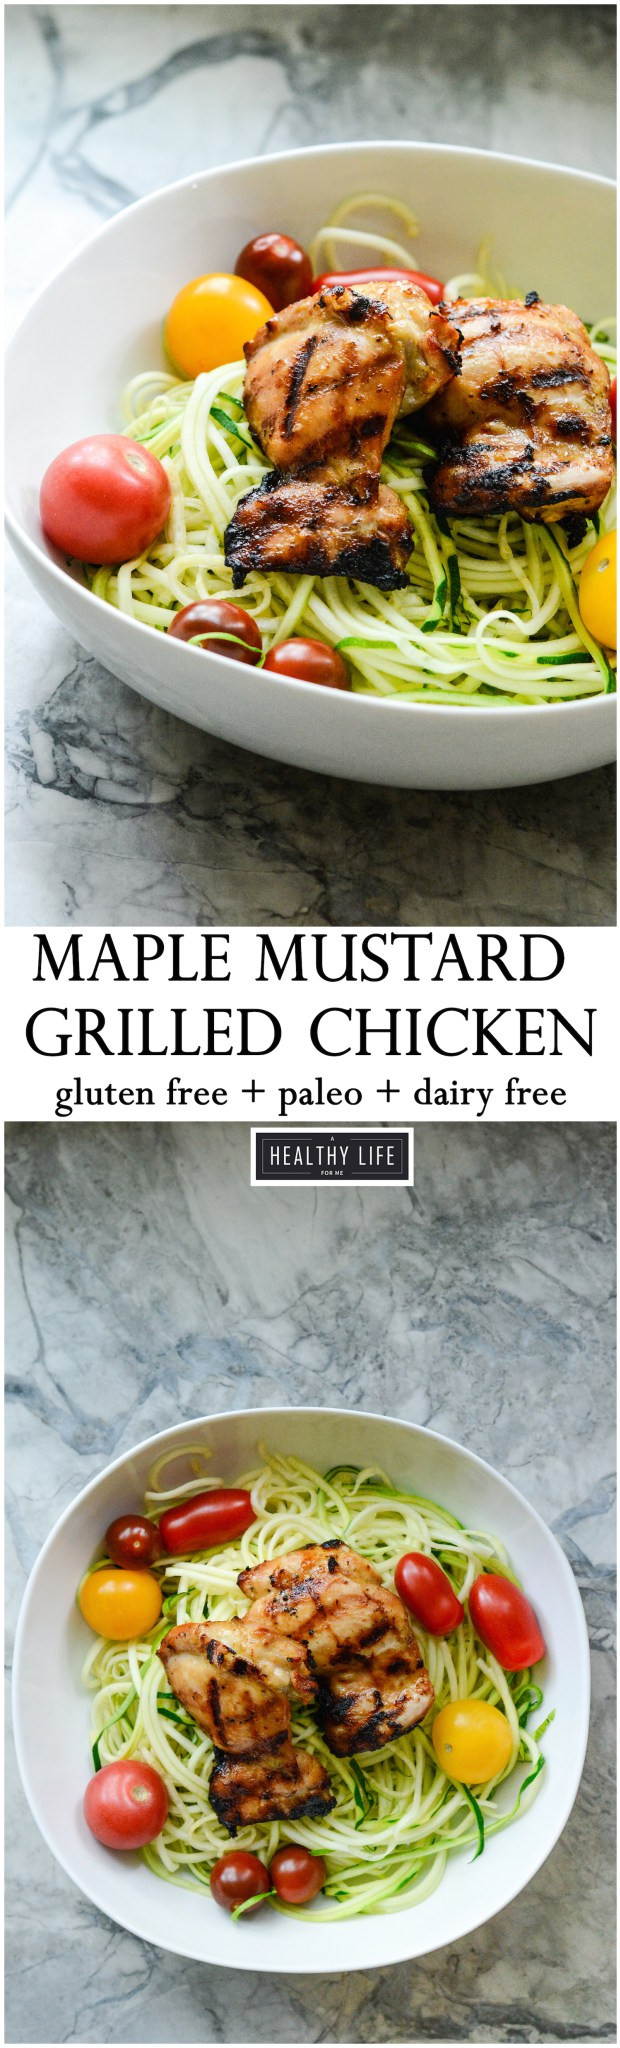 Low Calorie Grilled Chicken Recipes
 Maple Mustard Grilled Chicken